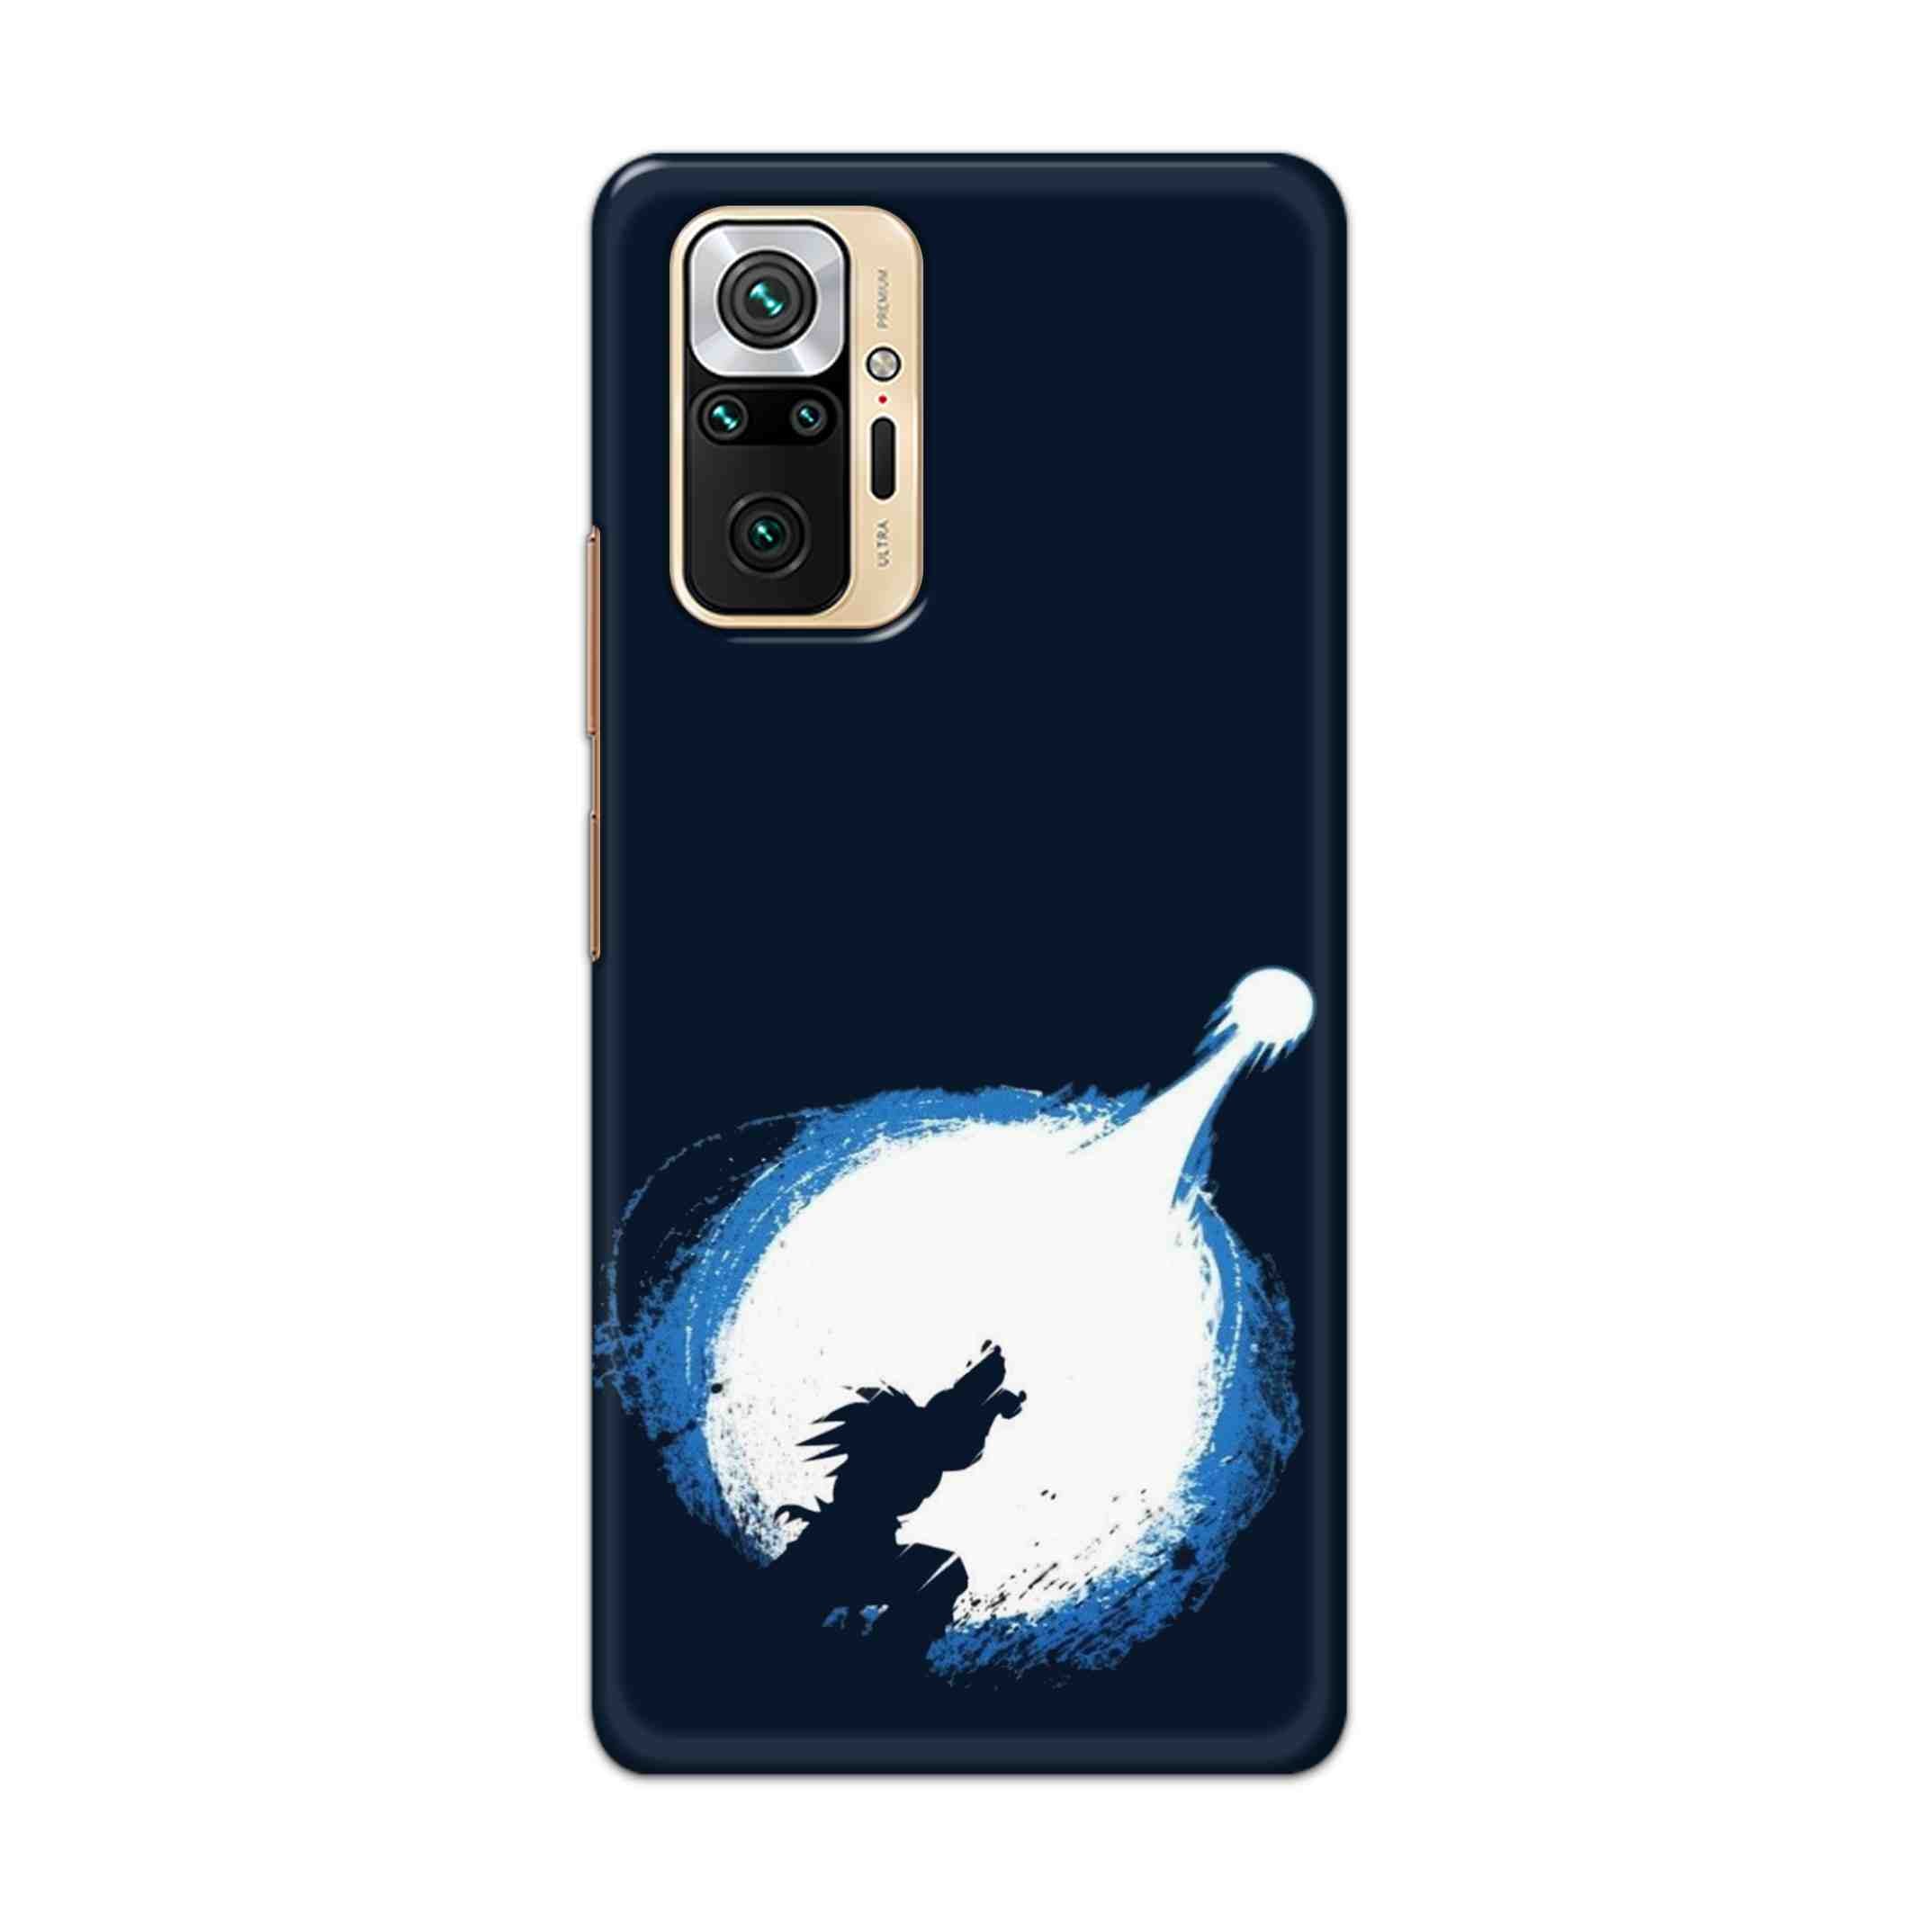 Buy Goku Power Hard Back Mobile Phone Case Cover For Redmi Note 10 Pro Online